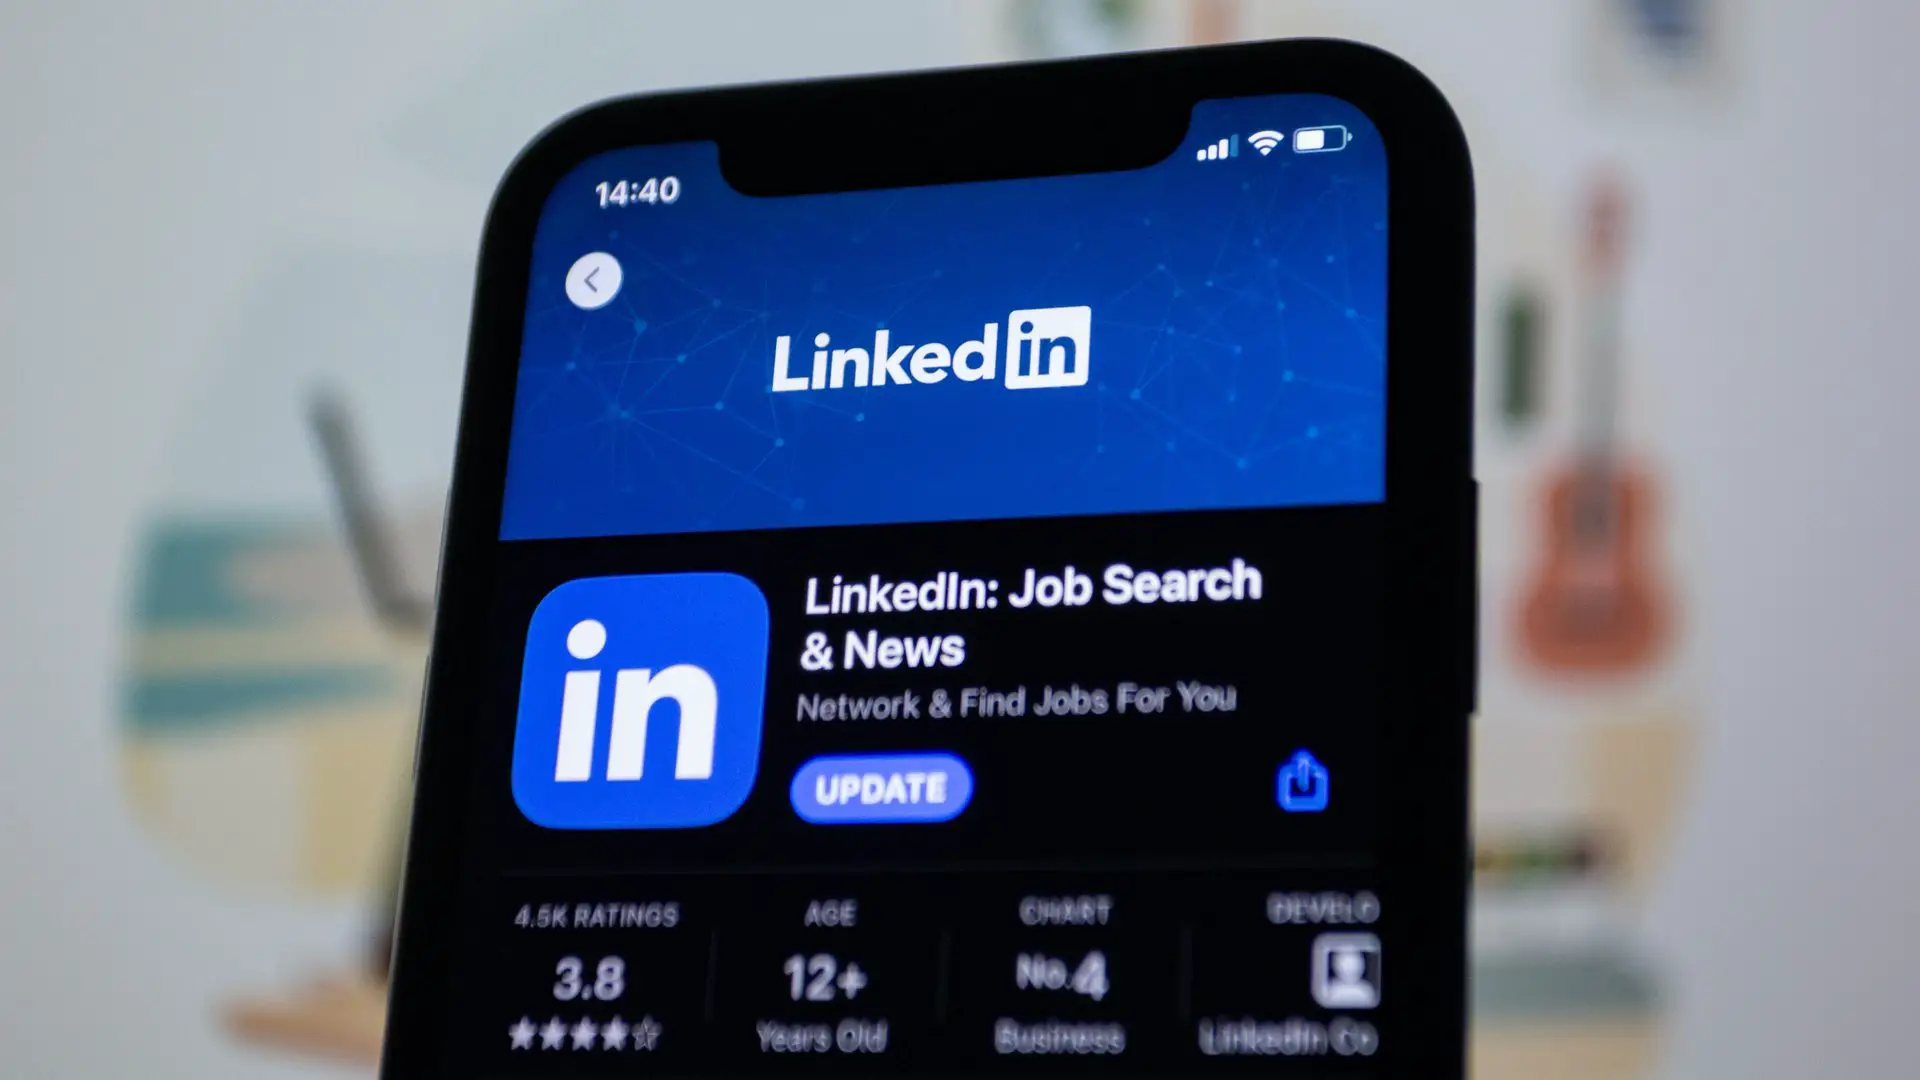 GPT-4 powered LinkedIn AI assistant explained. Learn how to use LinkedIn writing suggestions for headlines, summaries, and job descriptions. 